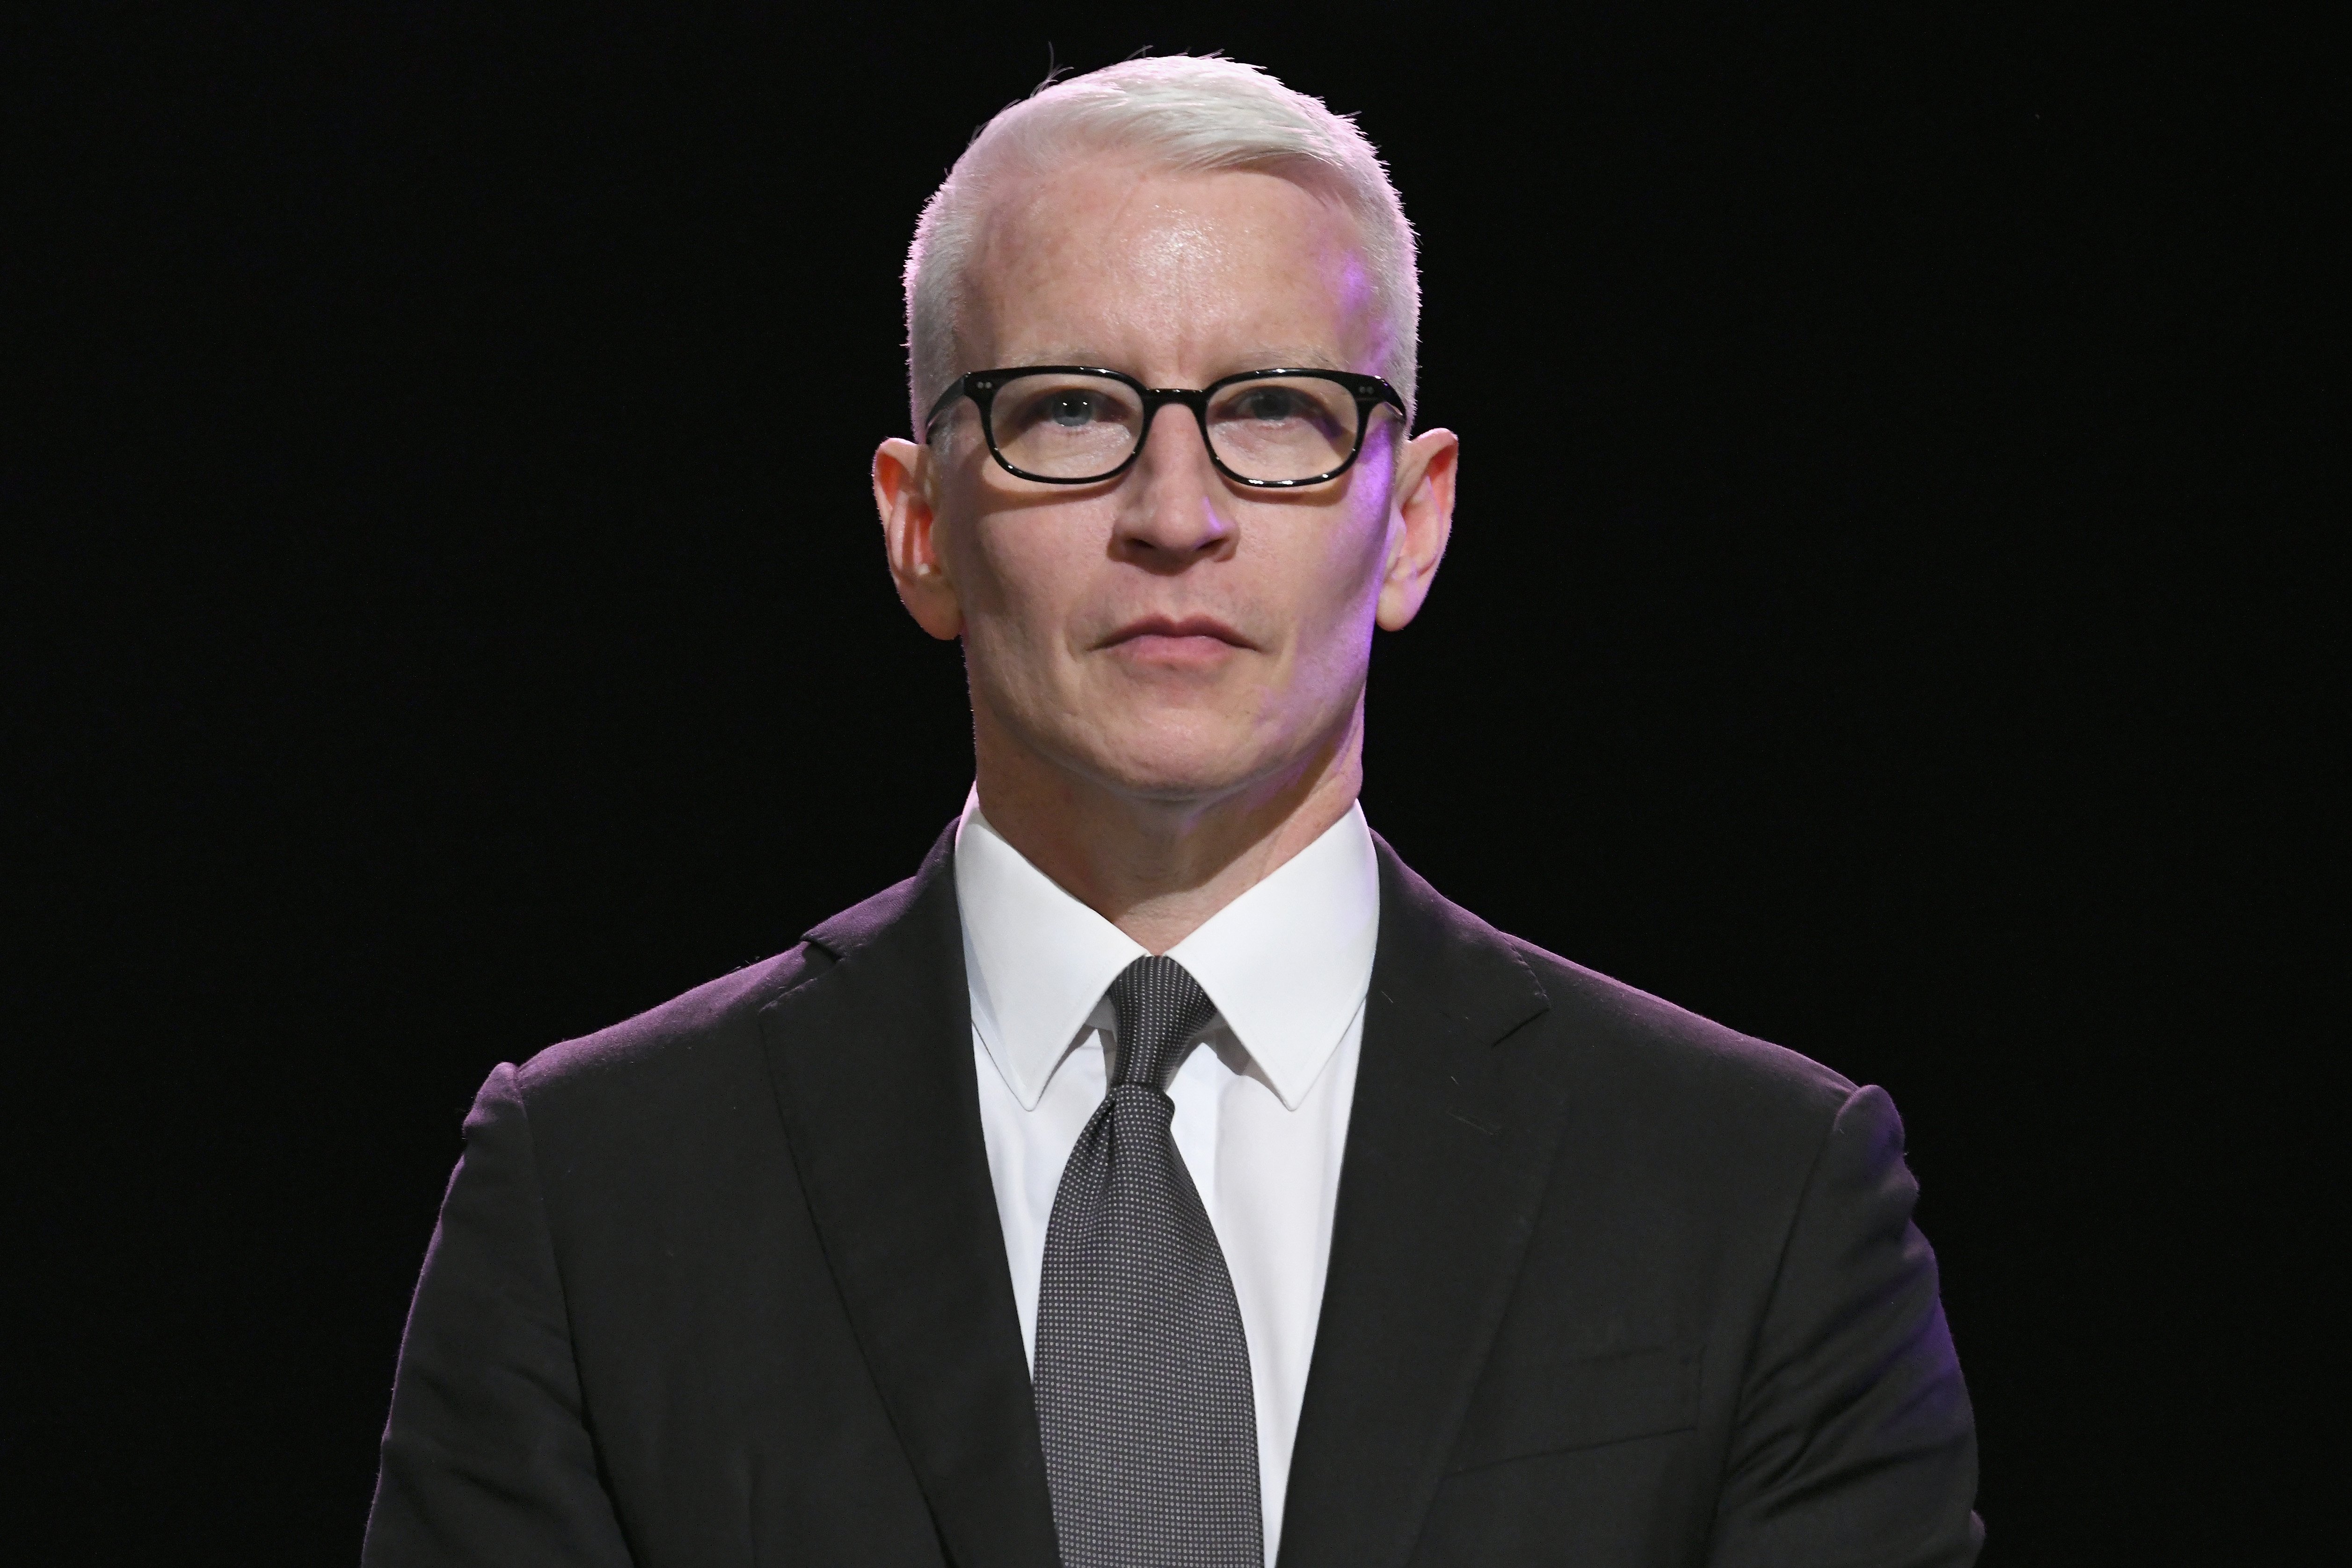 Anderson Cooper attends the Sean Penn CORE Gala on January 5, 2019, in Los Angeles, California. | Source: Getty Images.